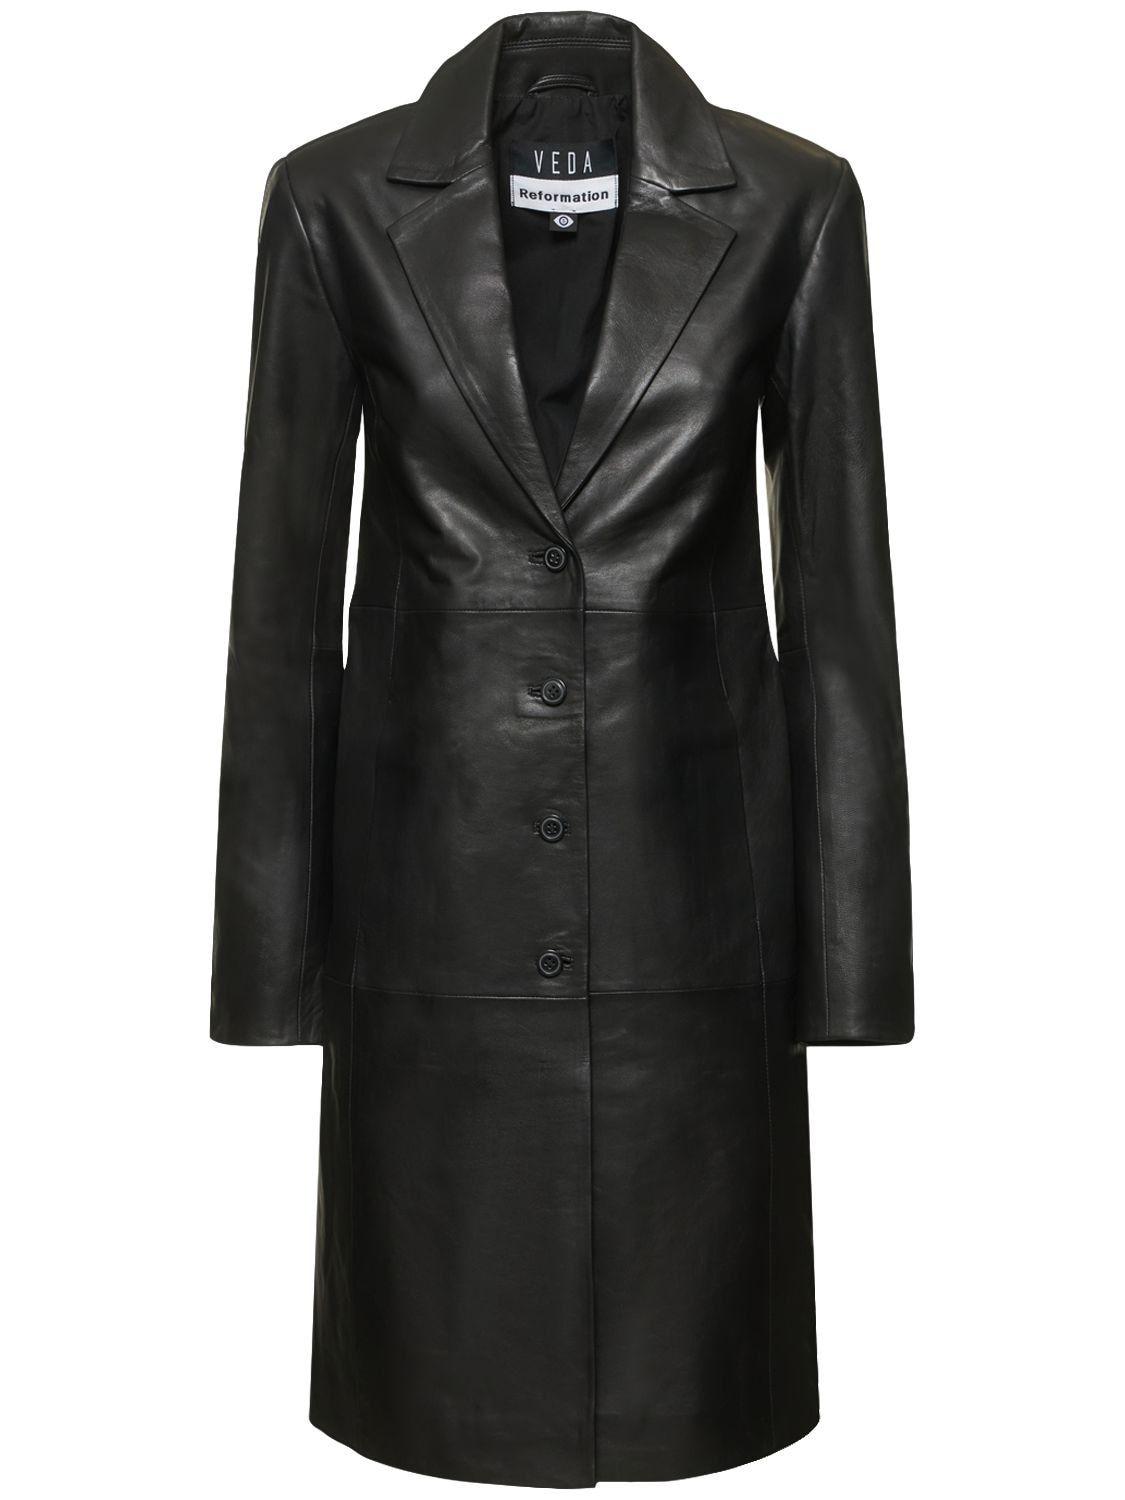 Reformation Veda Crosby Leather Trench Coat in Black | Lyst